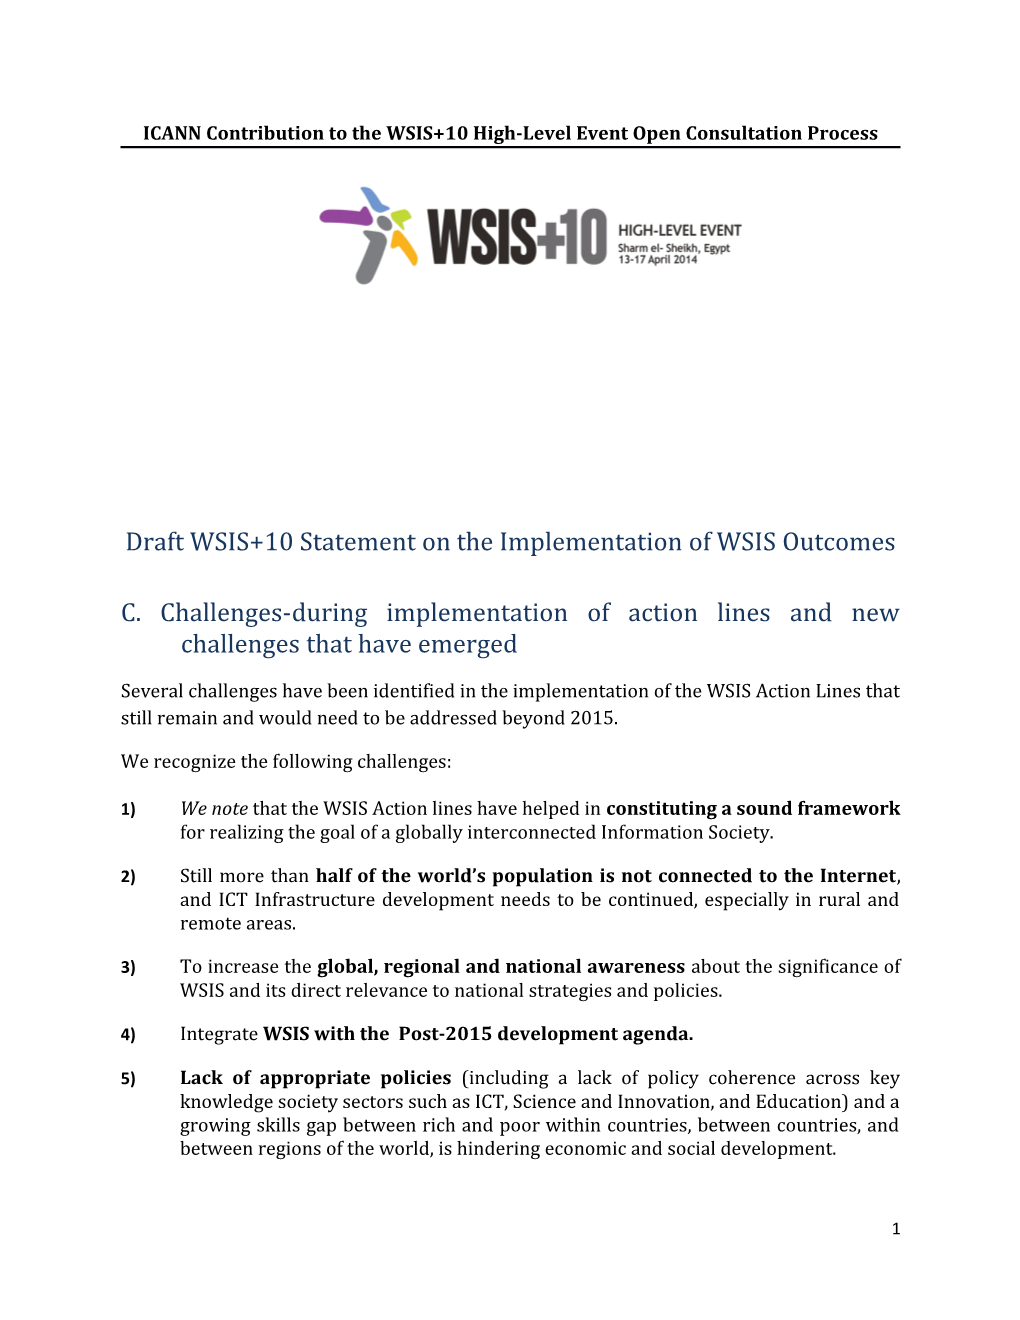 ICANN Contribution to the WSIS+10 High-Level Event Open Consultation Process